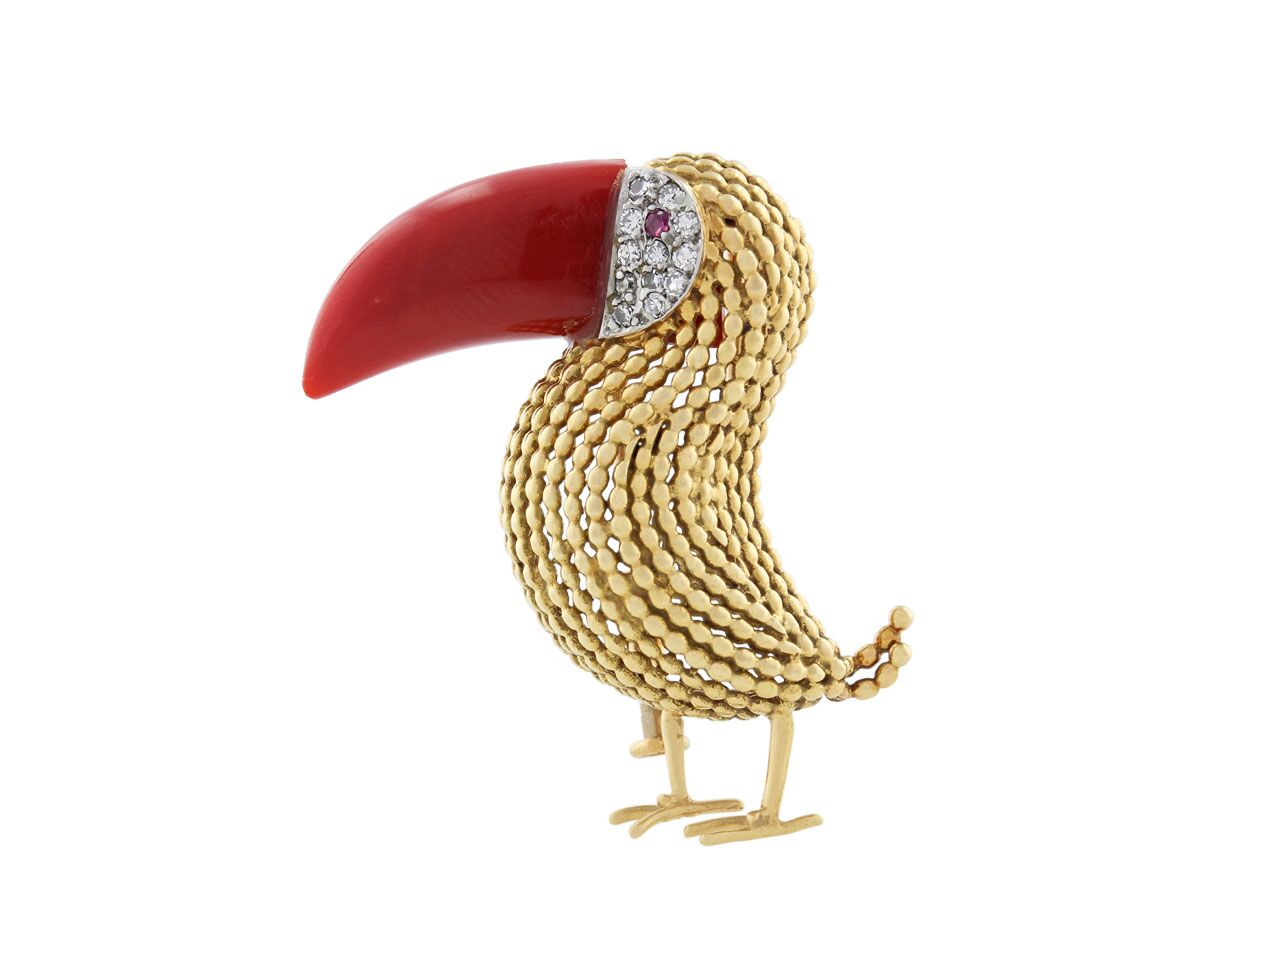 Mid-century French toucan coral brooch.